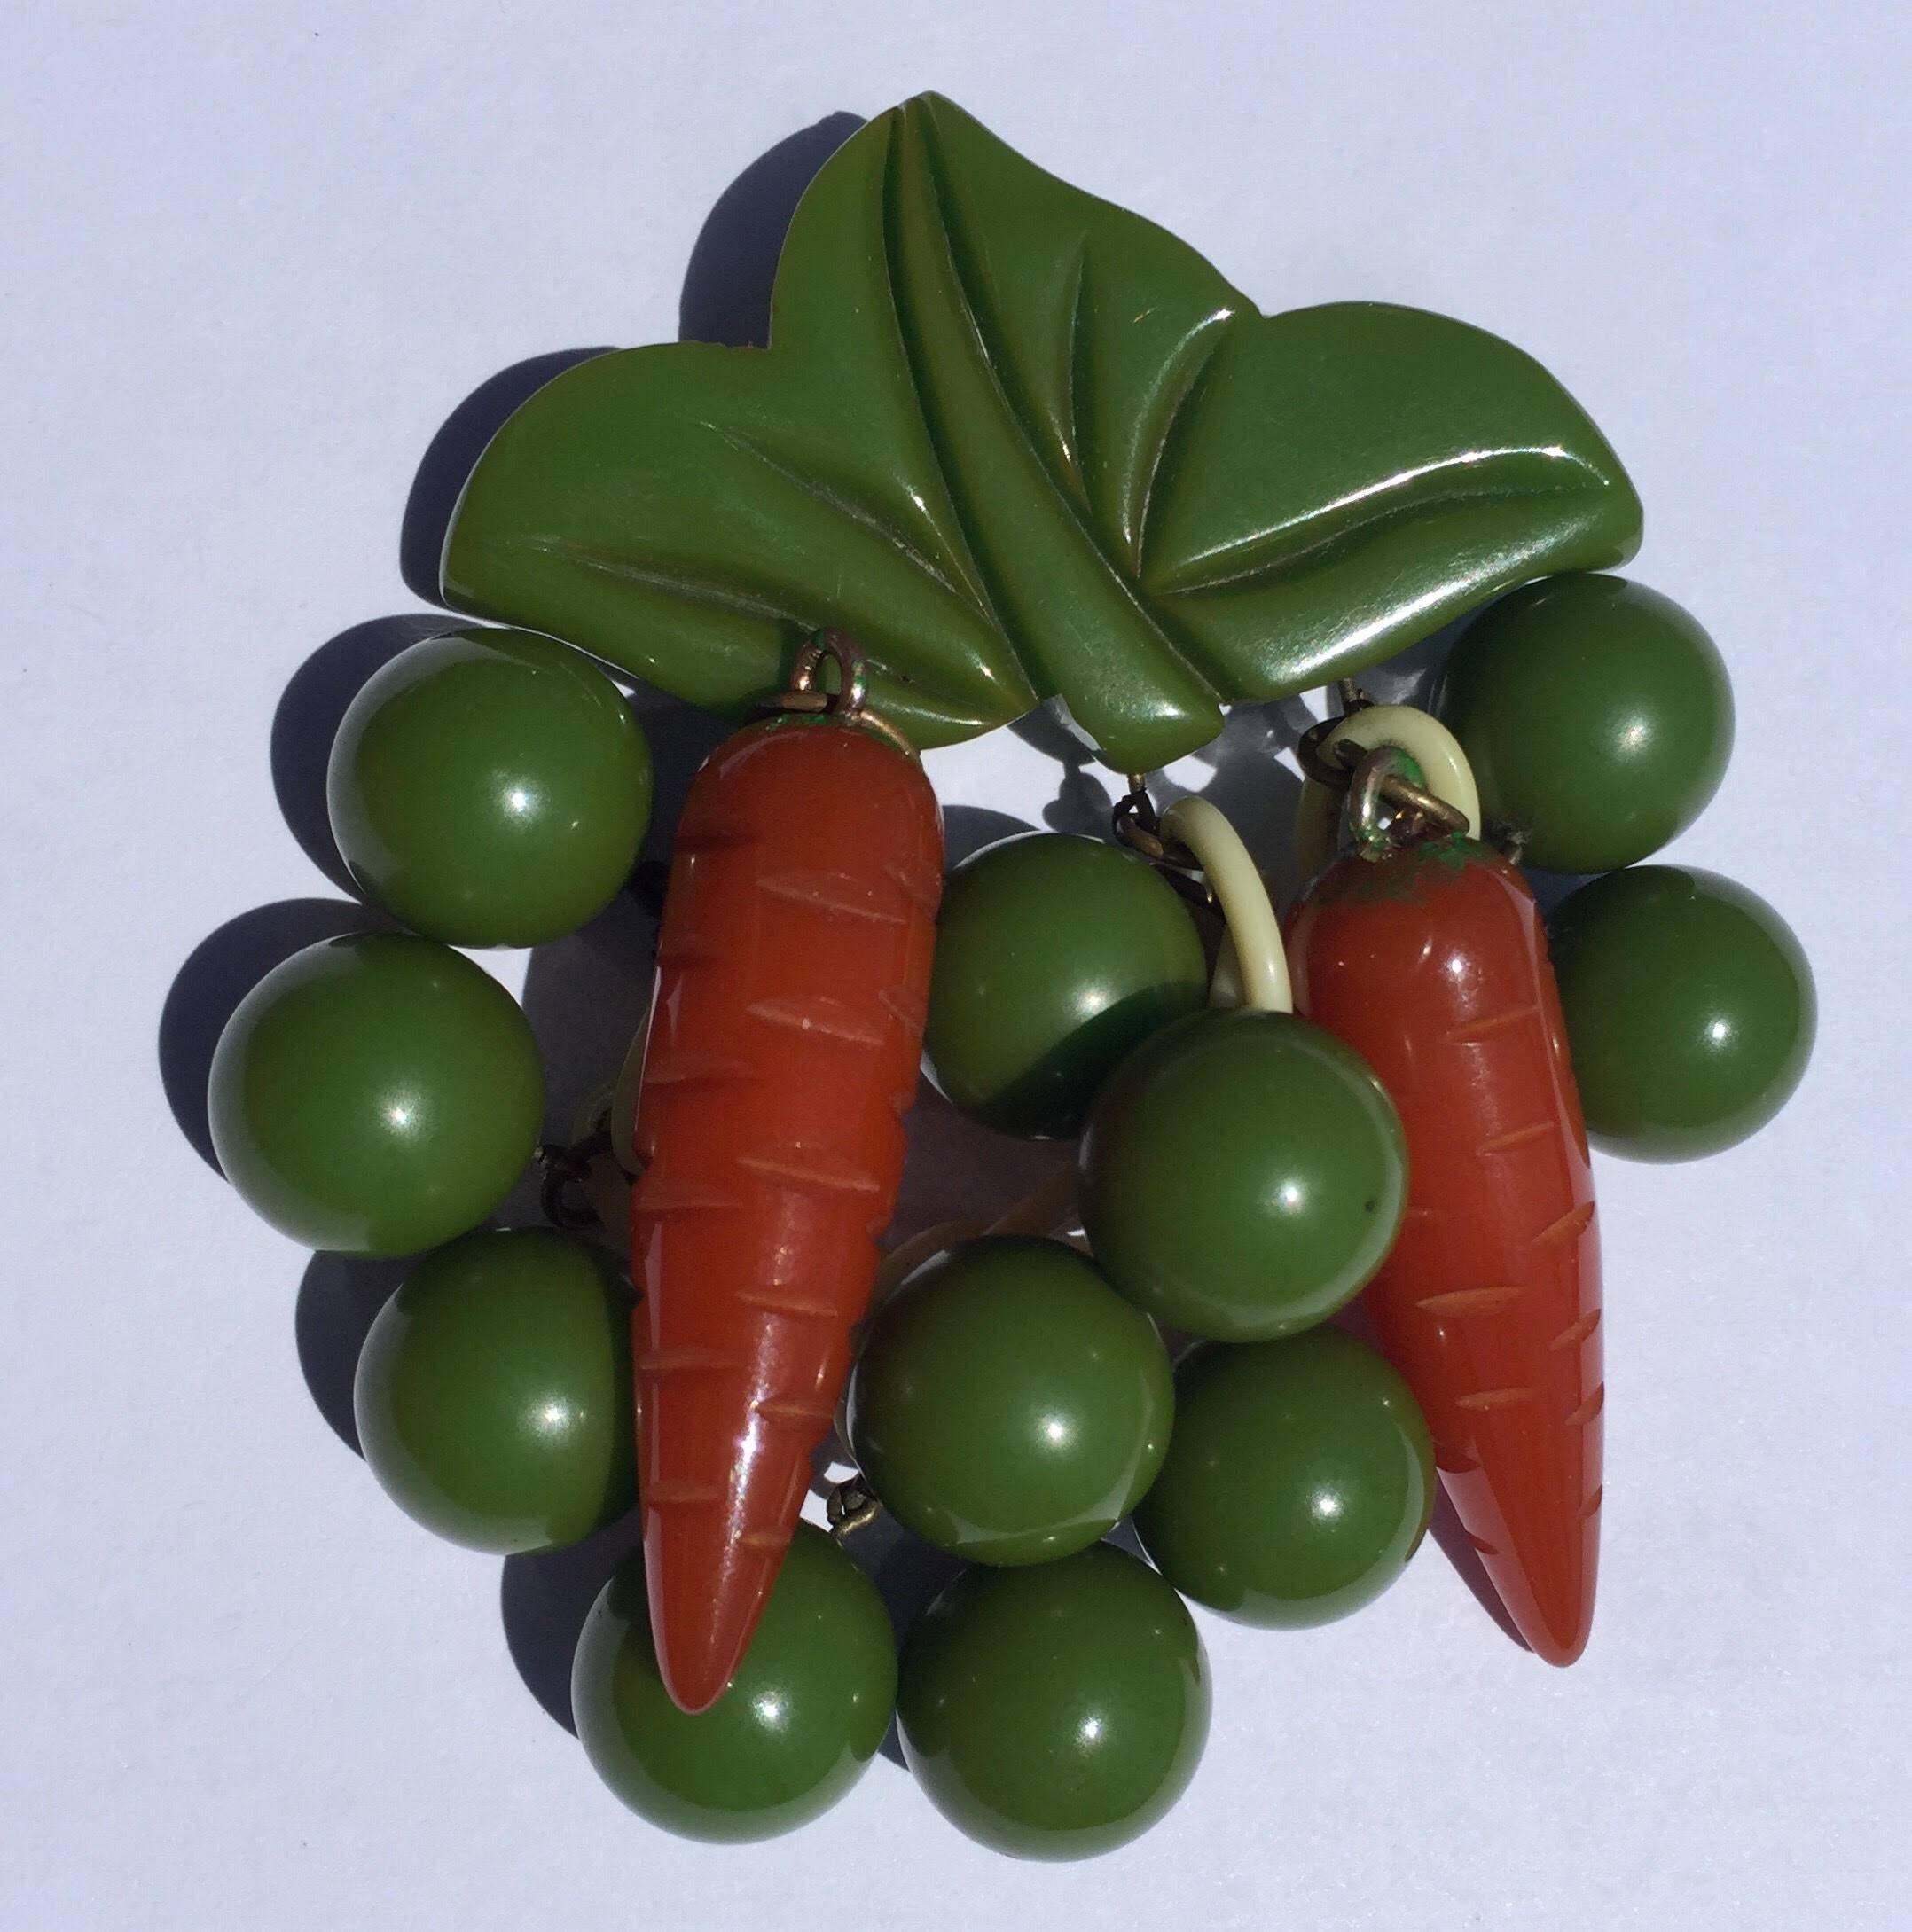 1930s Whimsical Bakelite Peas and Carrots Figural Brooch/Pin In Excellent Condition For Sale In Palm Springs, CA